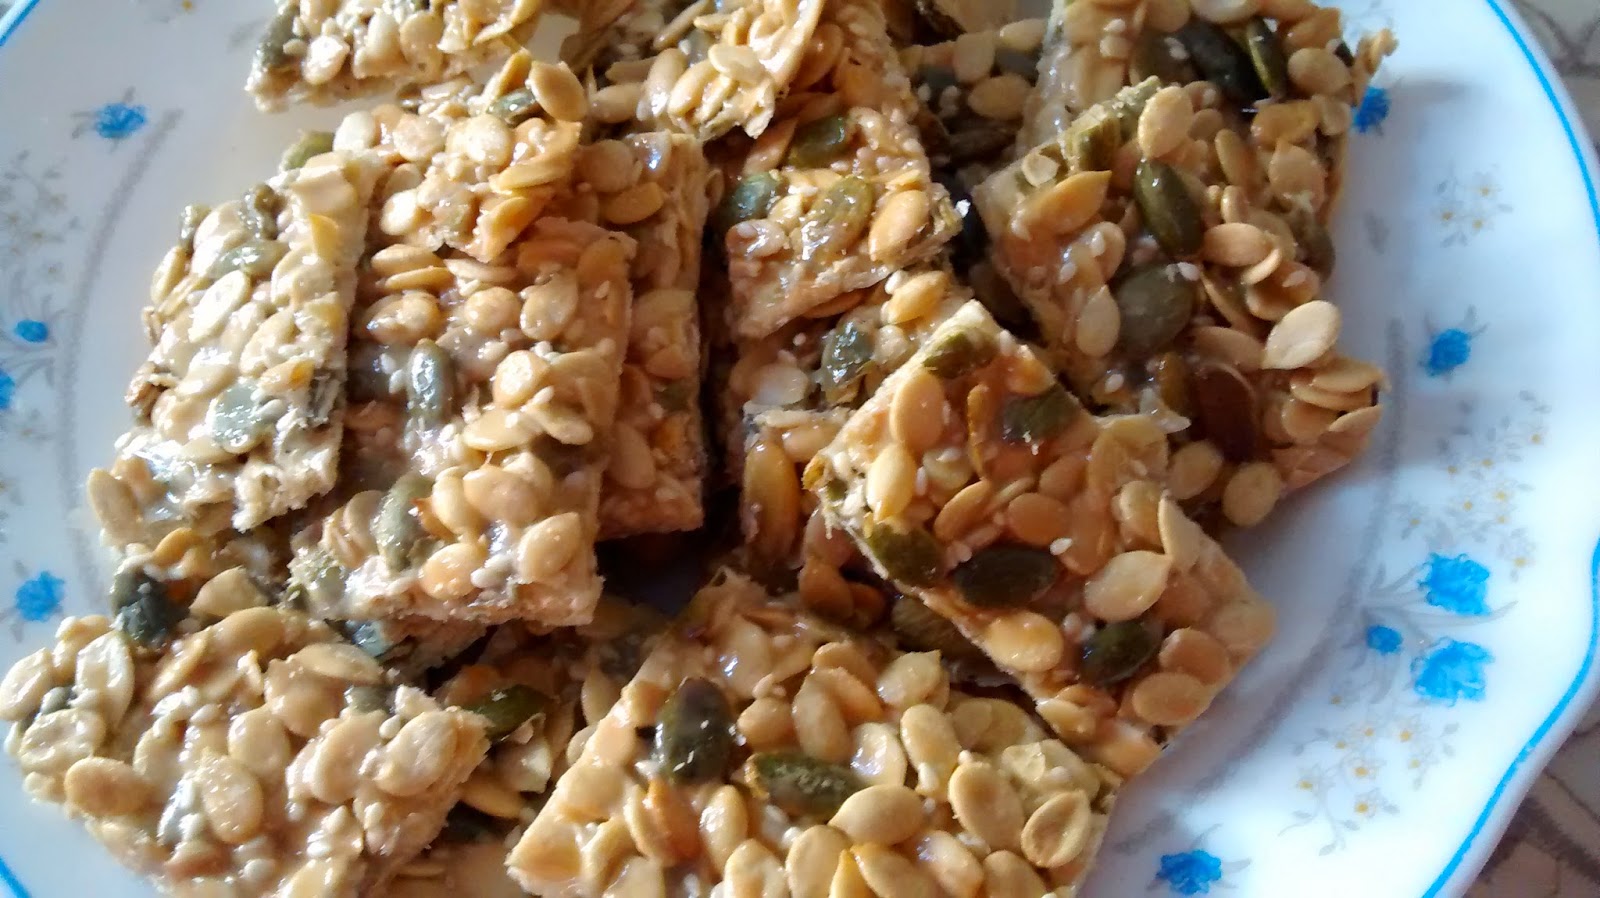 For Our Eyes Only: Florentine - Crunchy Caramel Almond